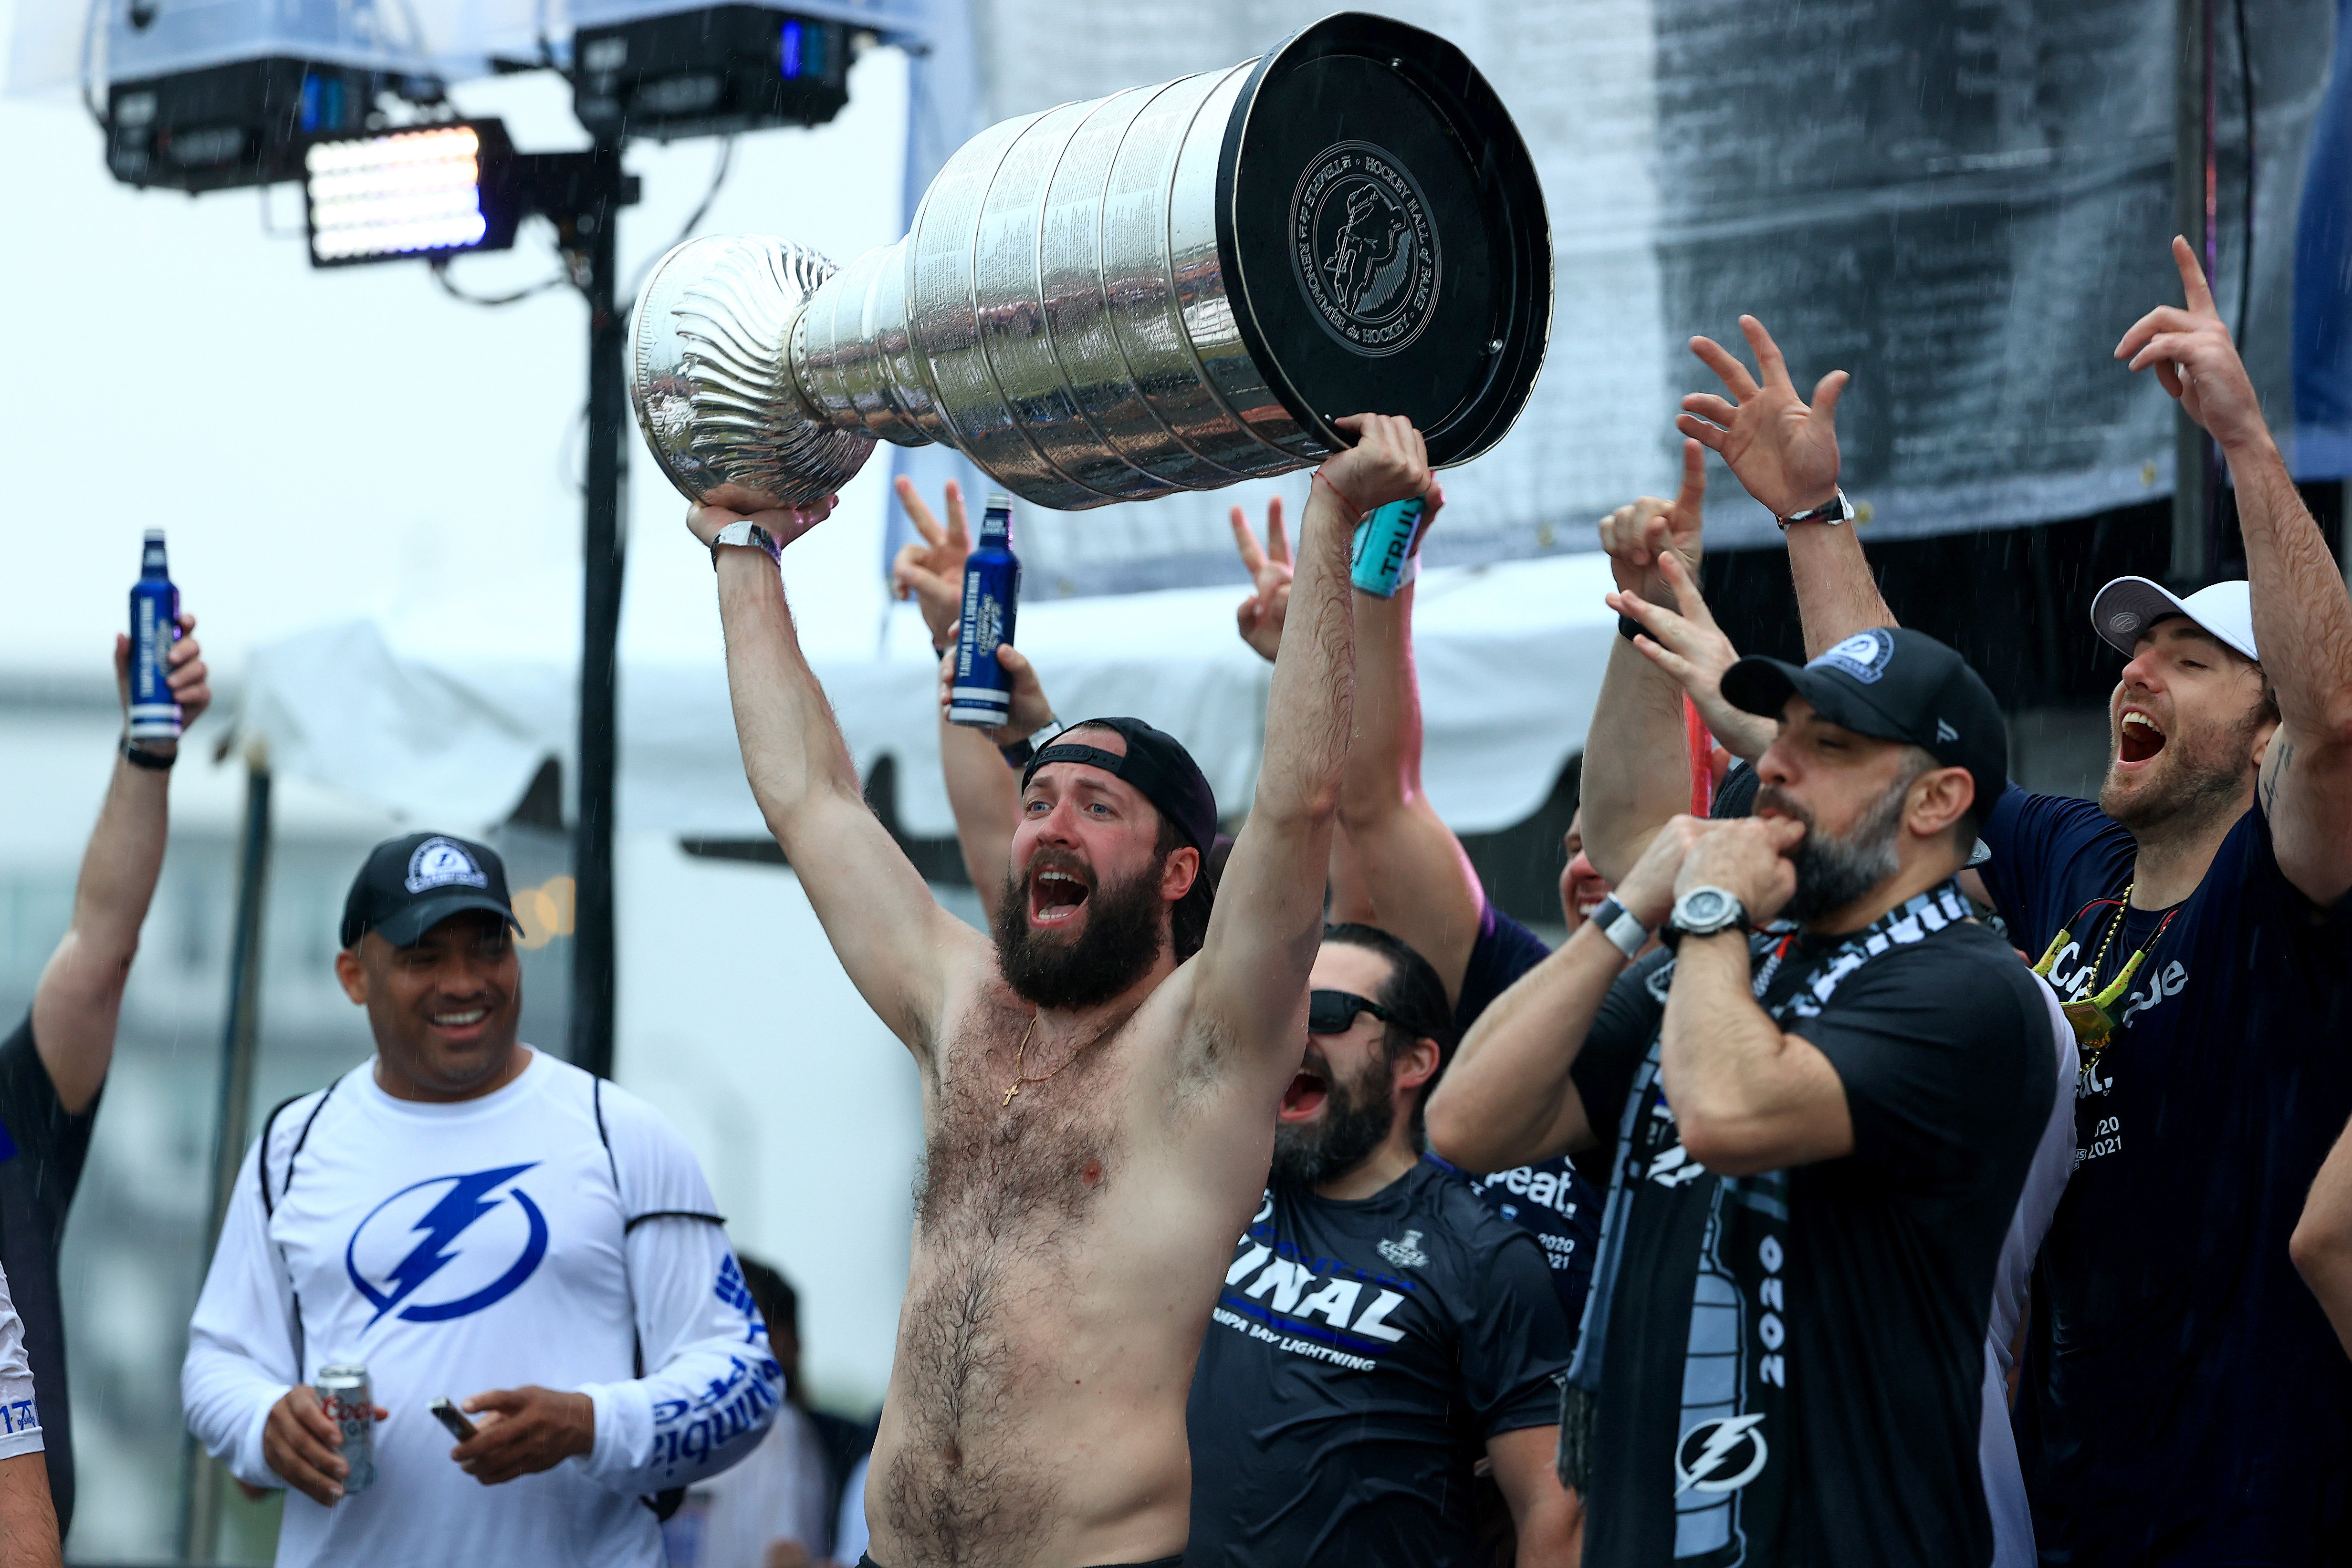 Stanley Cup gets dented during Lightning's championship boat parade 